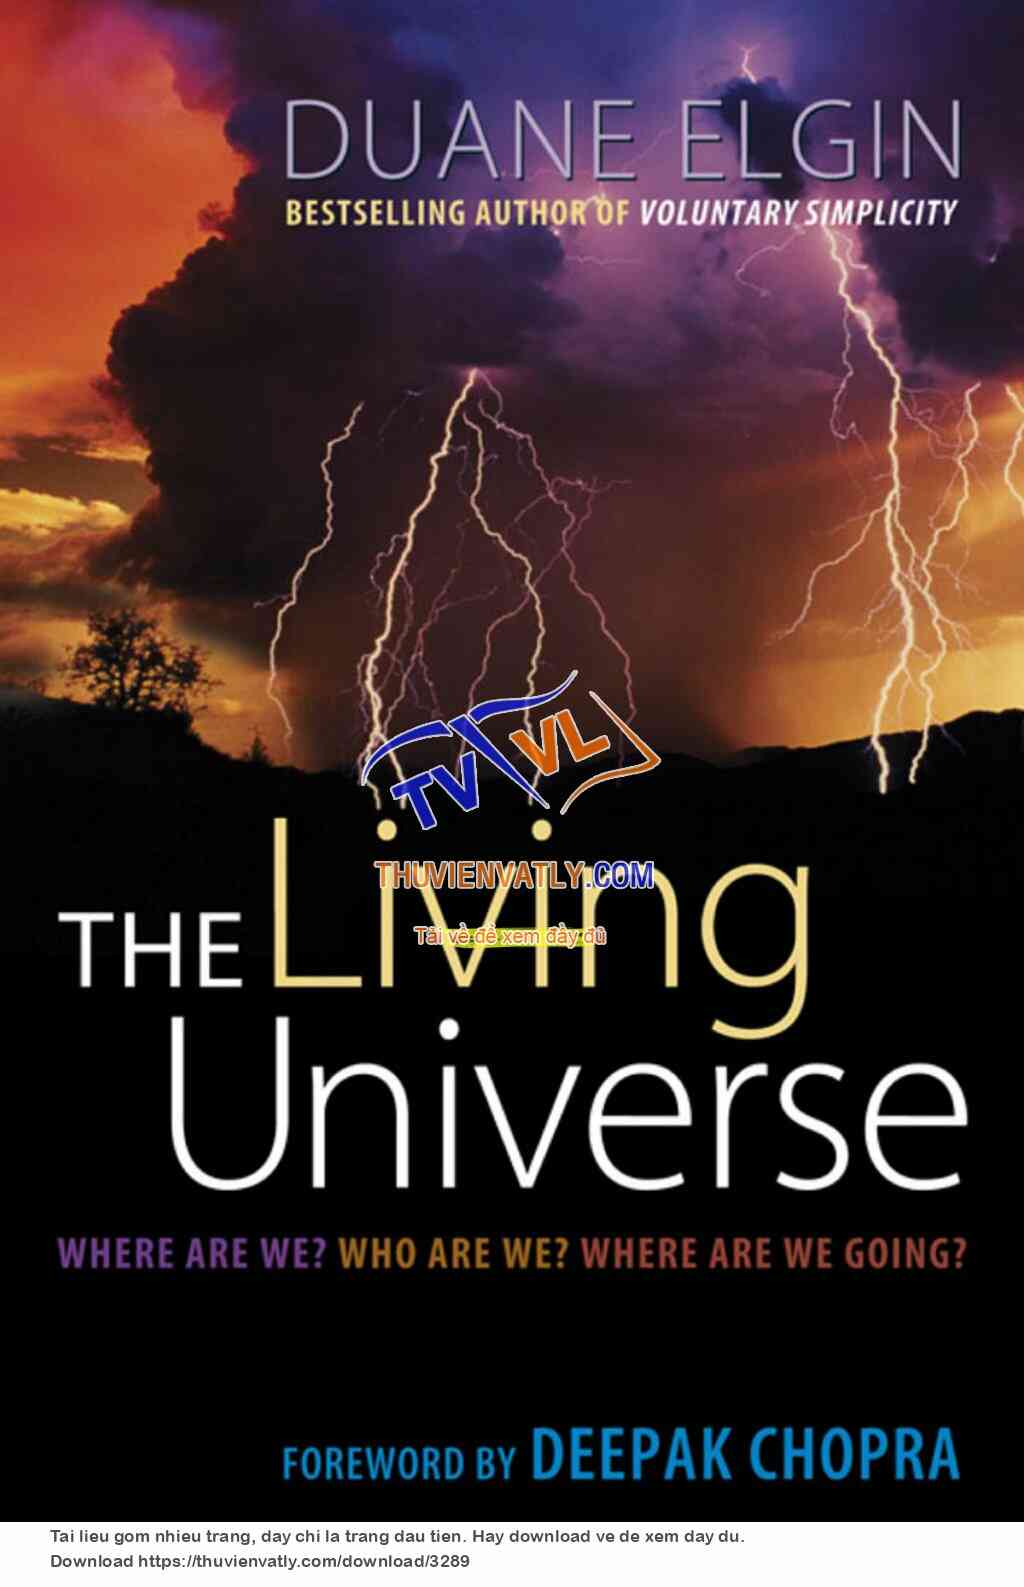 The Living Universe